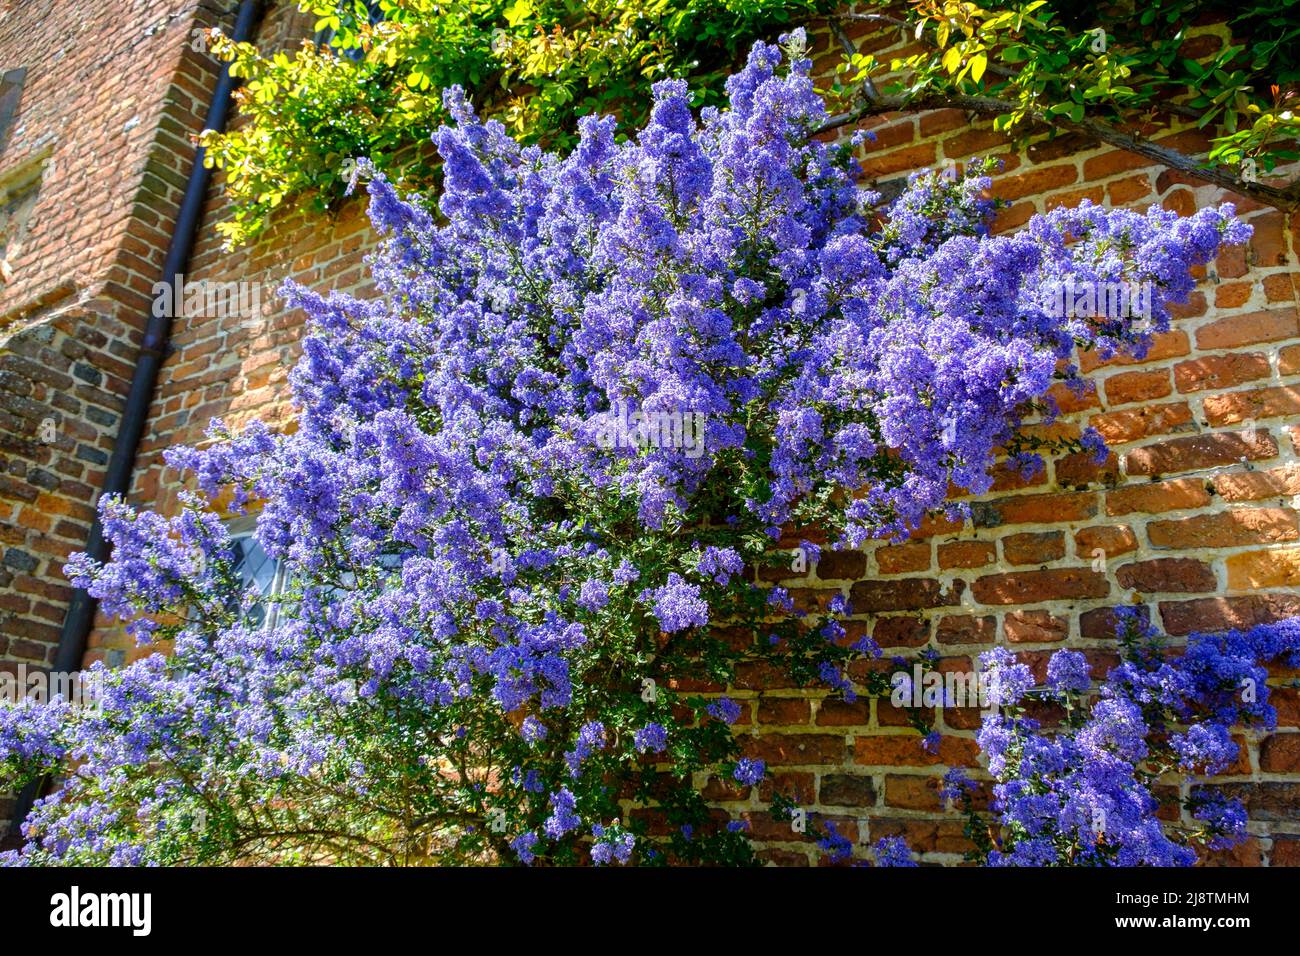 Ceanothus planted against a red brick wall, Kent, UK Stock Photo